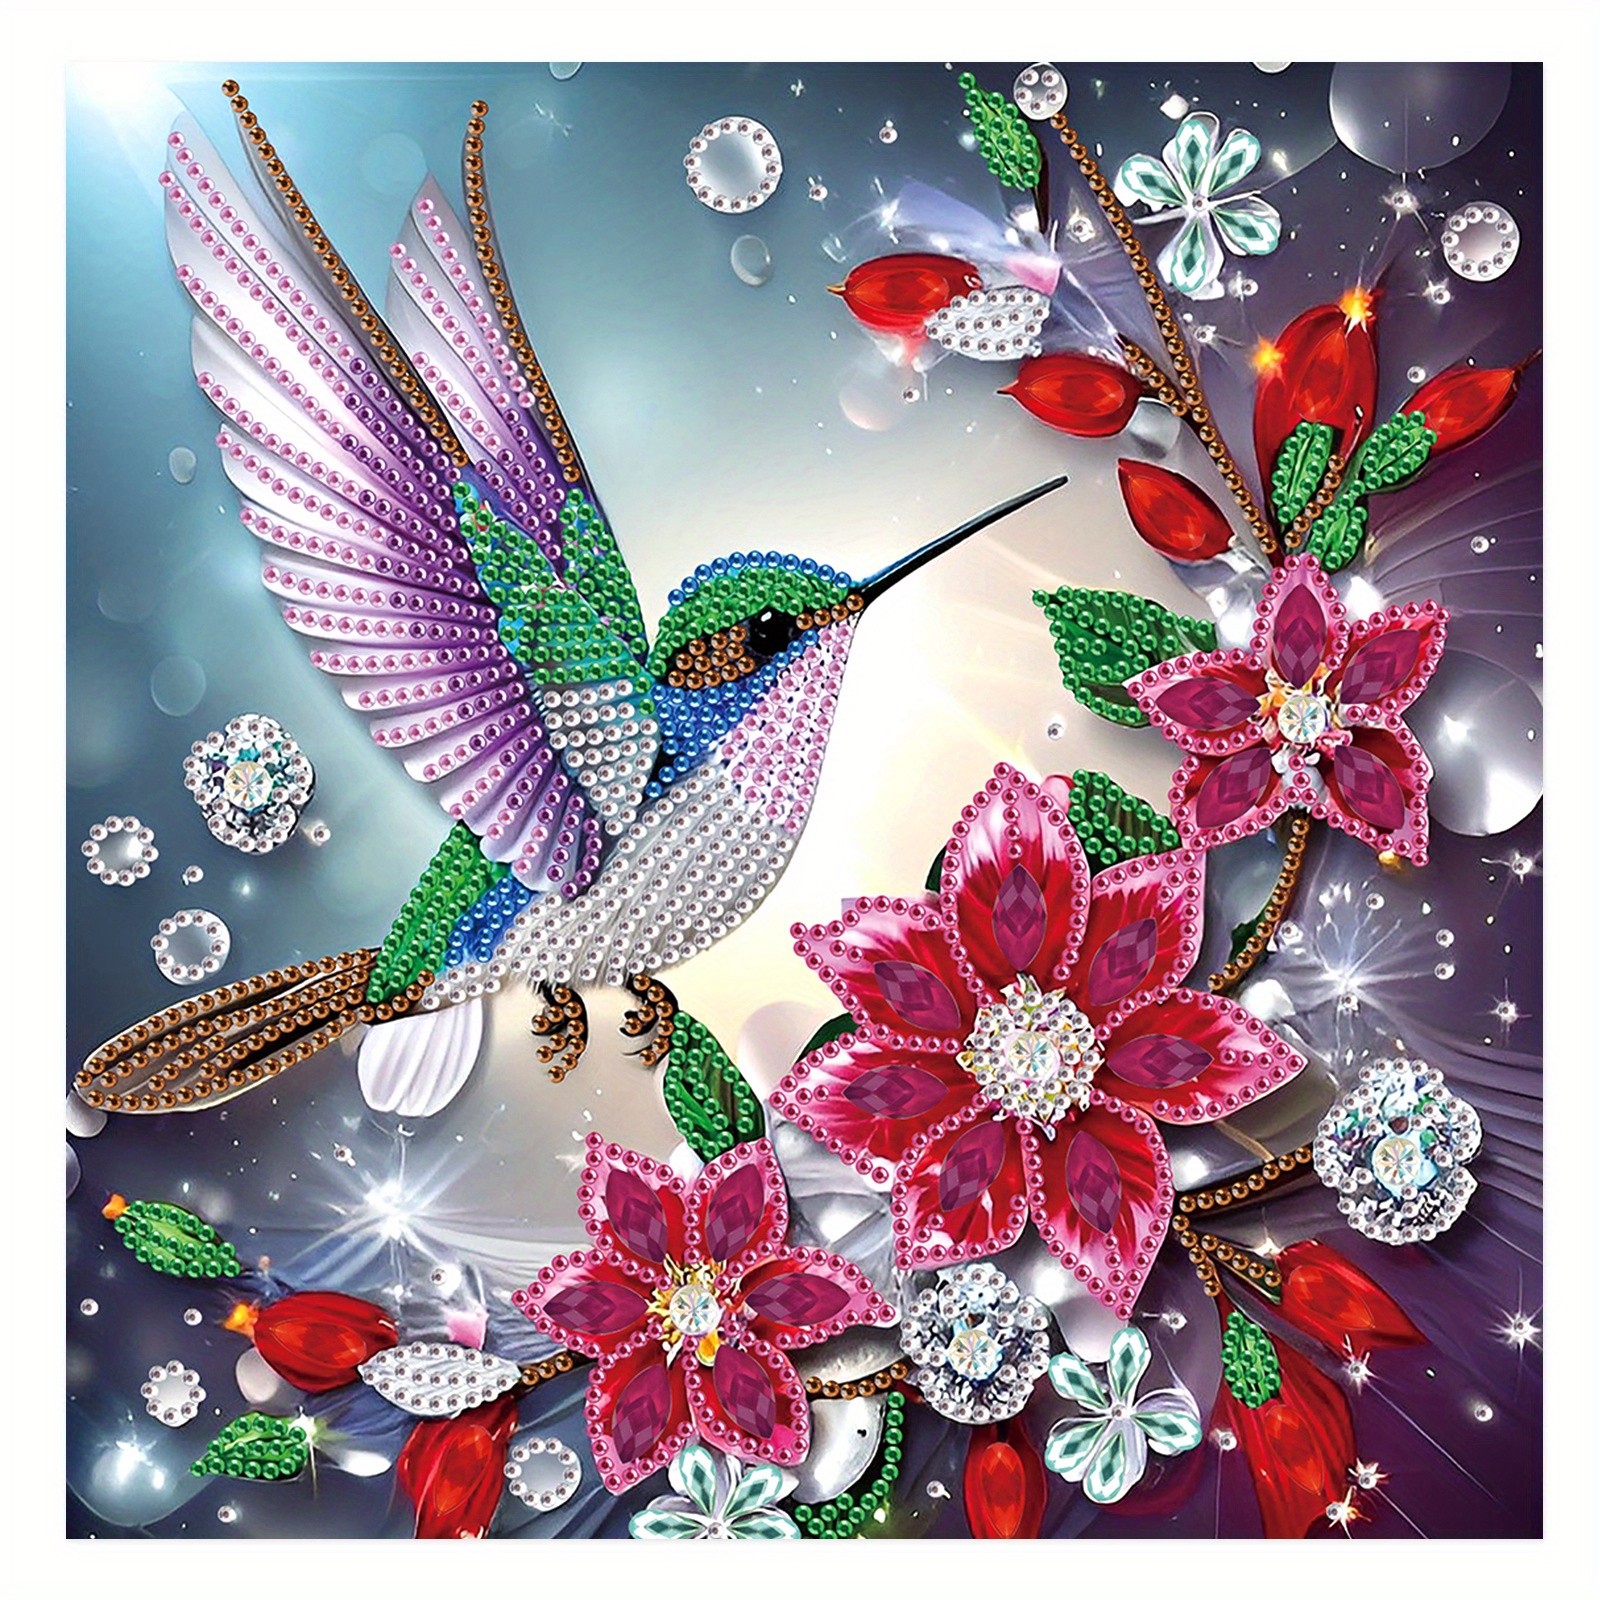 

Hummingbird 5d Diamond Painting Kit For Adults - Special Shaped Crystal Rhinestone Art, Beginner Friendly, Home Wall Decor Gift, 12x12 Inches